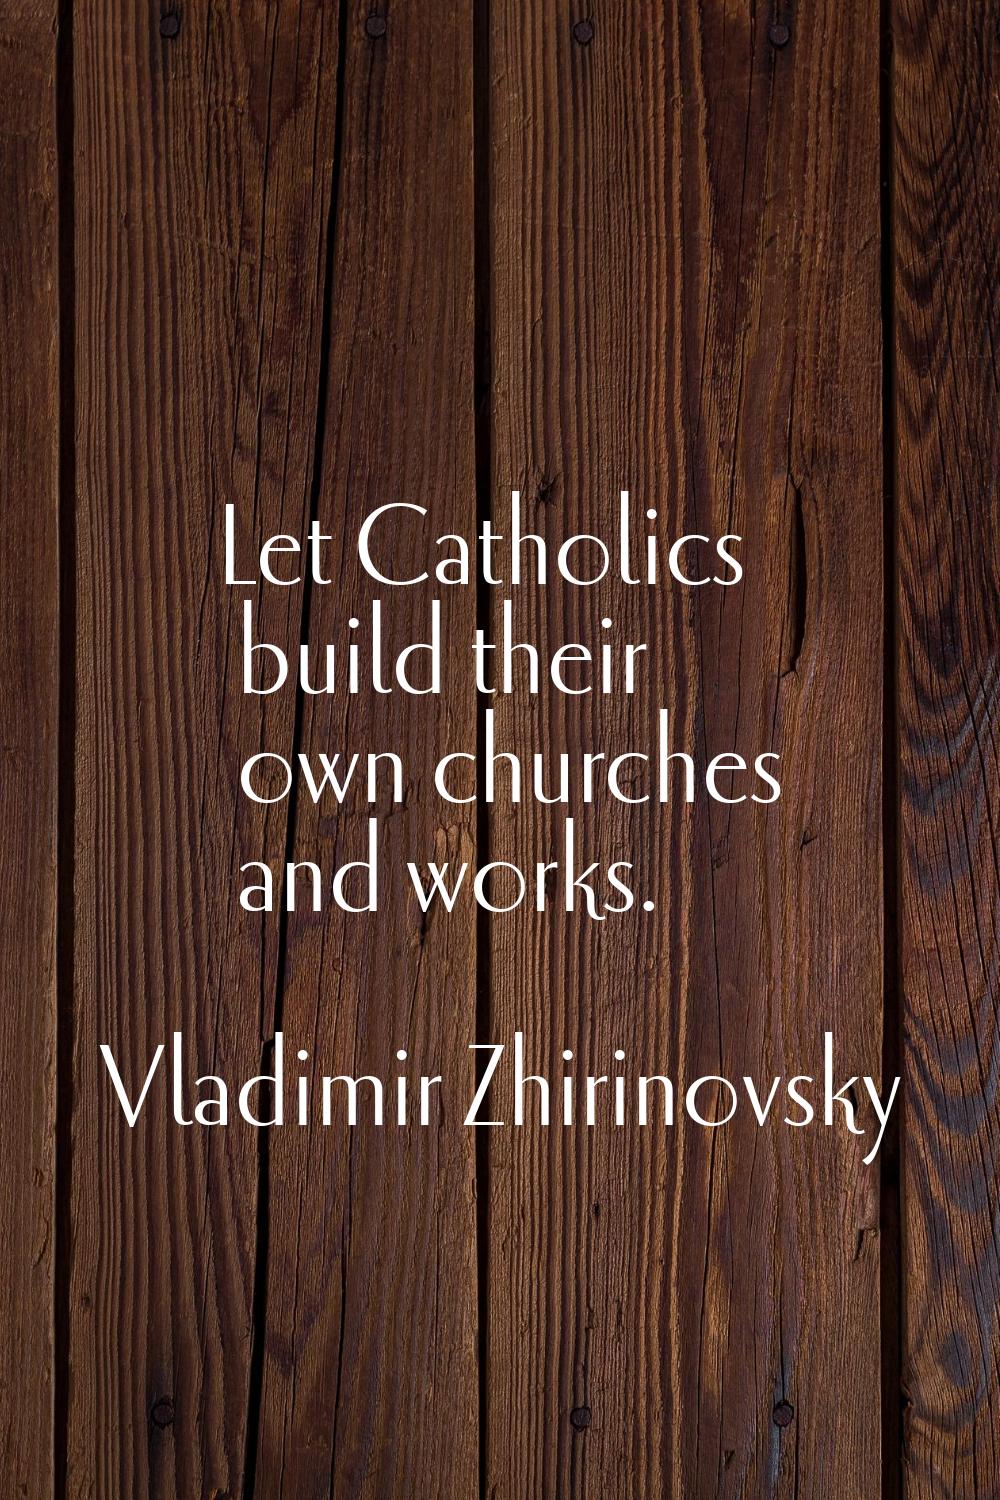 Let Catholics build their own churches and works.